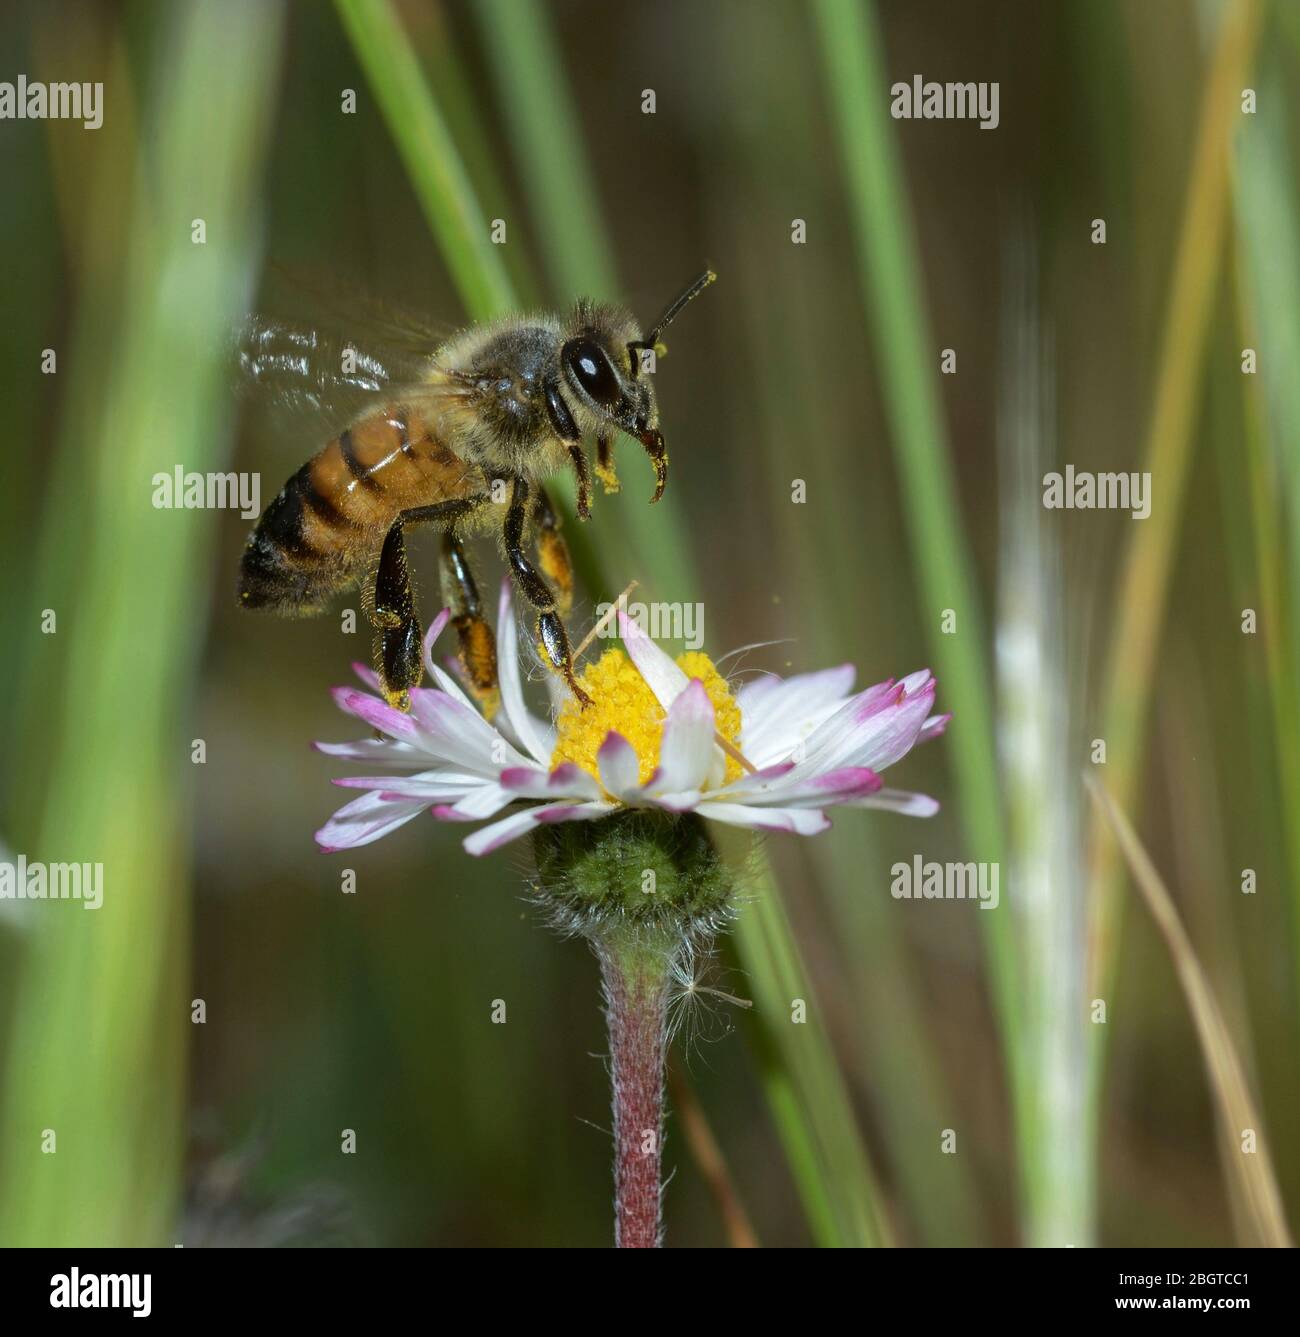 close-up of honey bee on daisy flower on blurred background Stock Photo